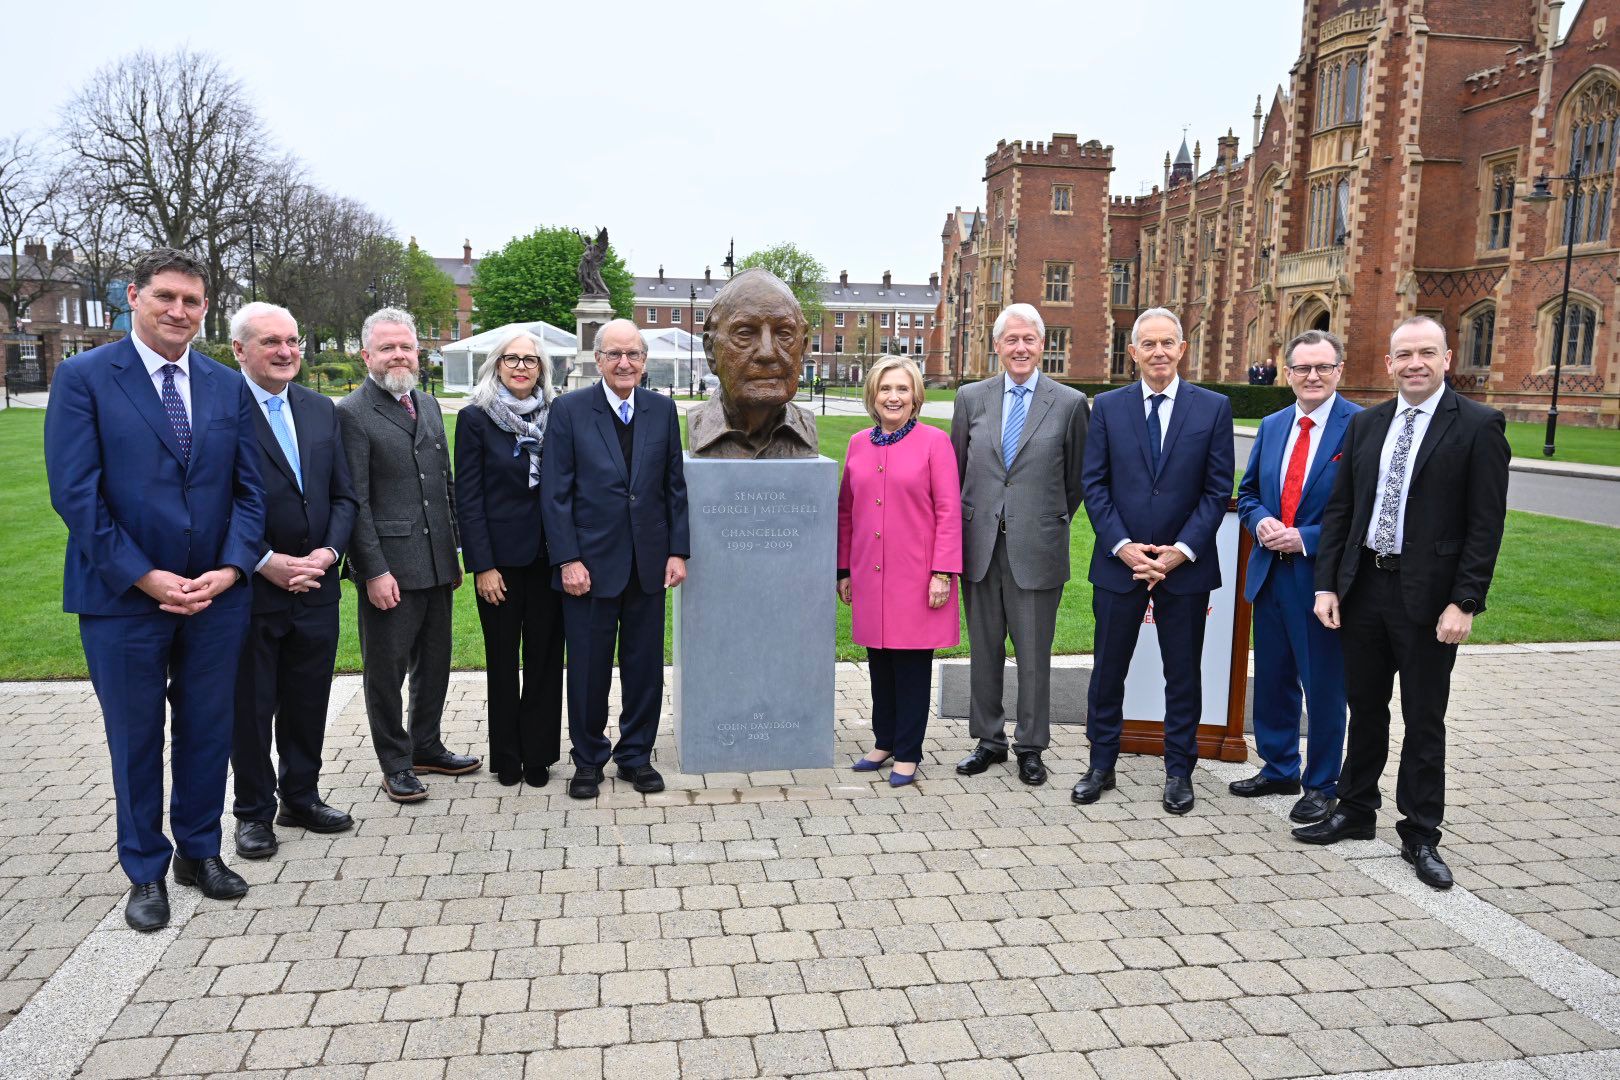 A bust of Senator George J. Mitchell is unveiled